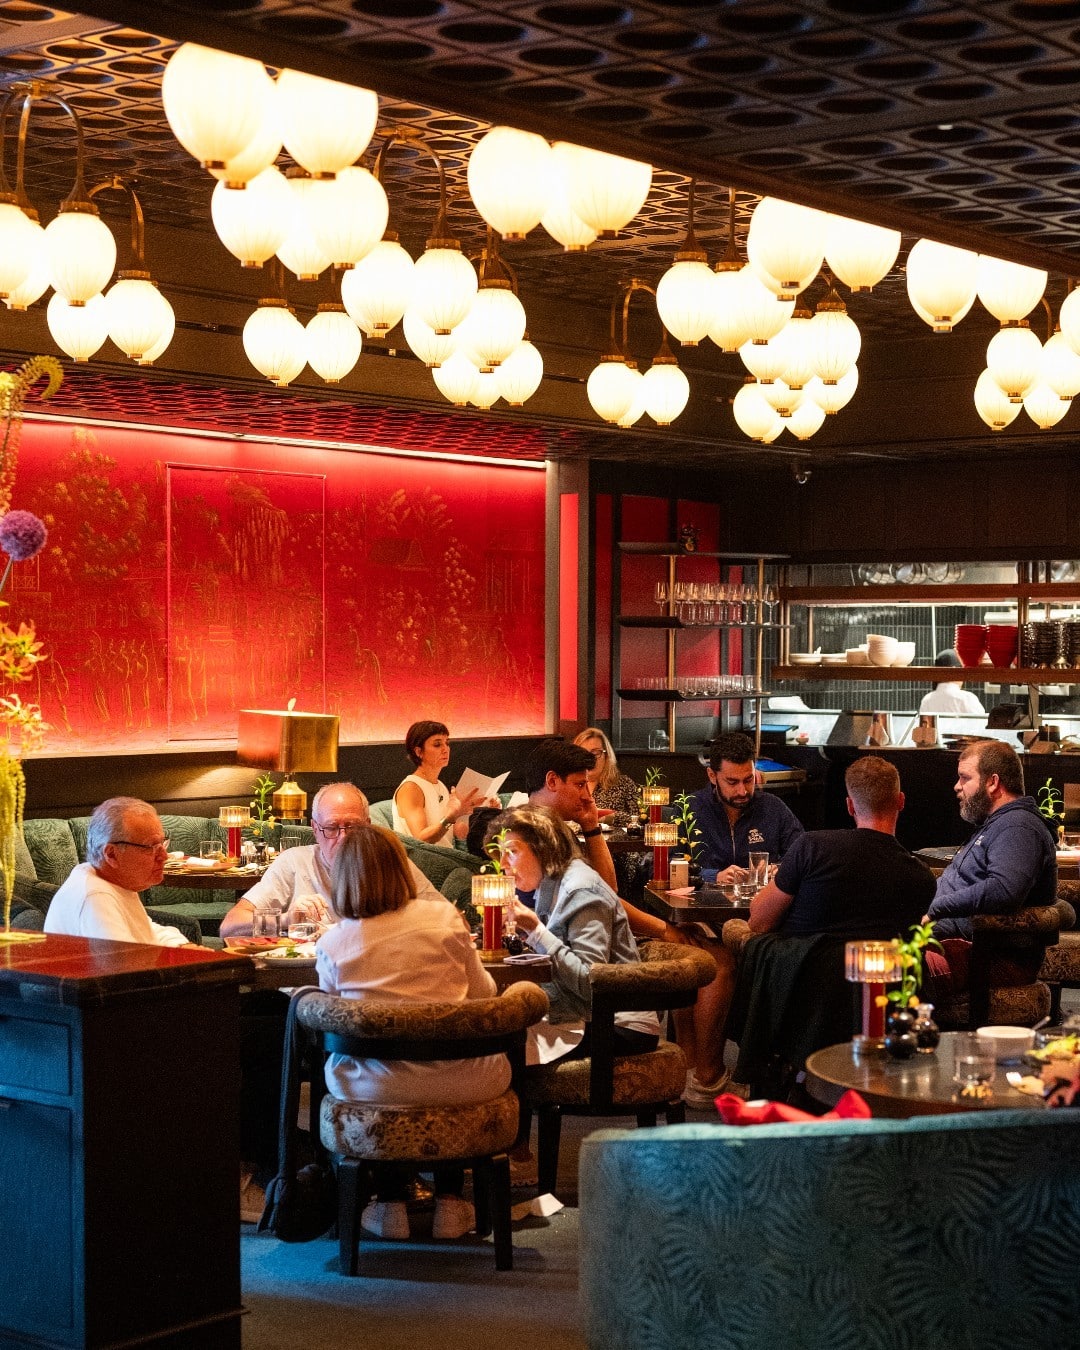 Escape another rainy day with a delicious dinner inside the @tinbuilding ↴ ➤ House of the Red Pearl ➤ The Frenchman’s Dough ➤ T. Brasserie And so much more. #TheSeaport